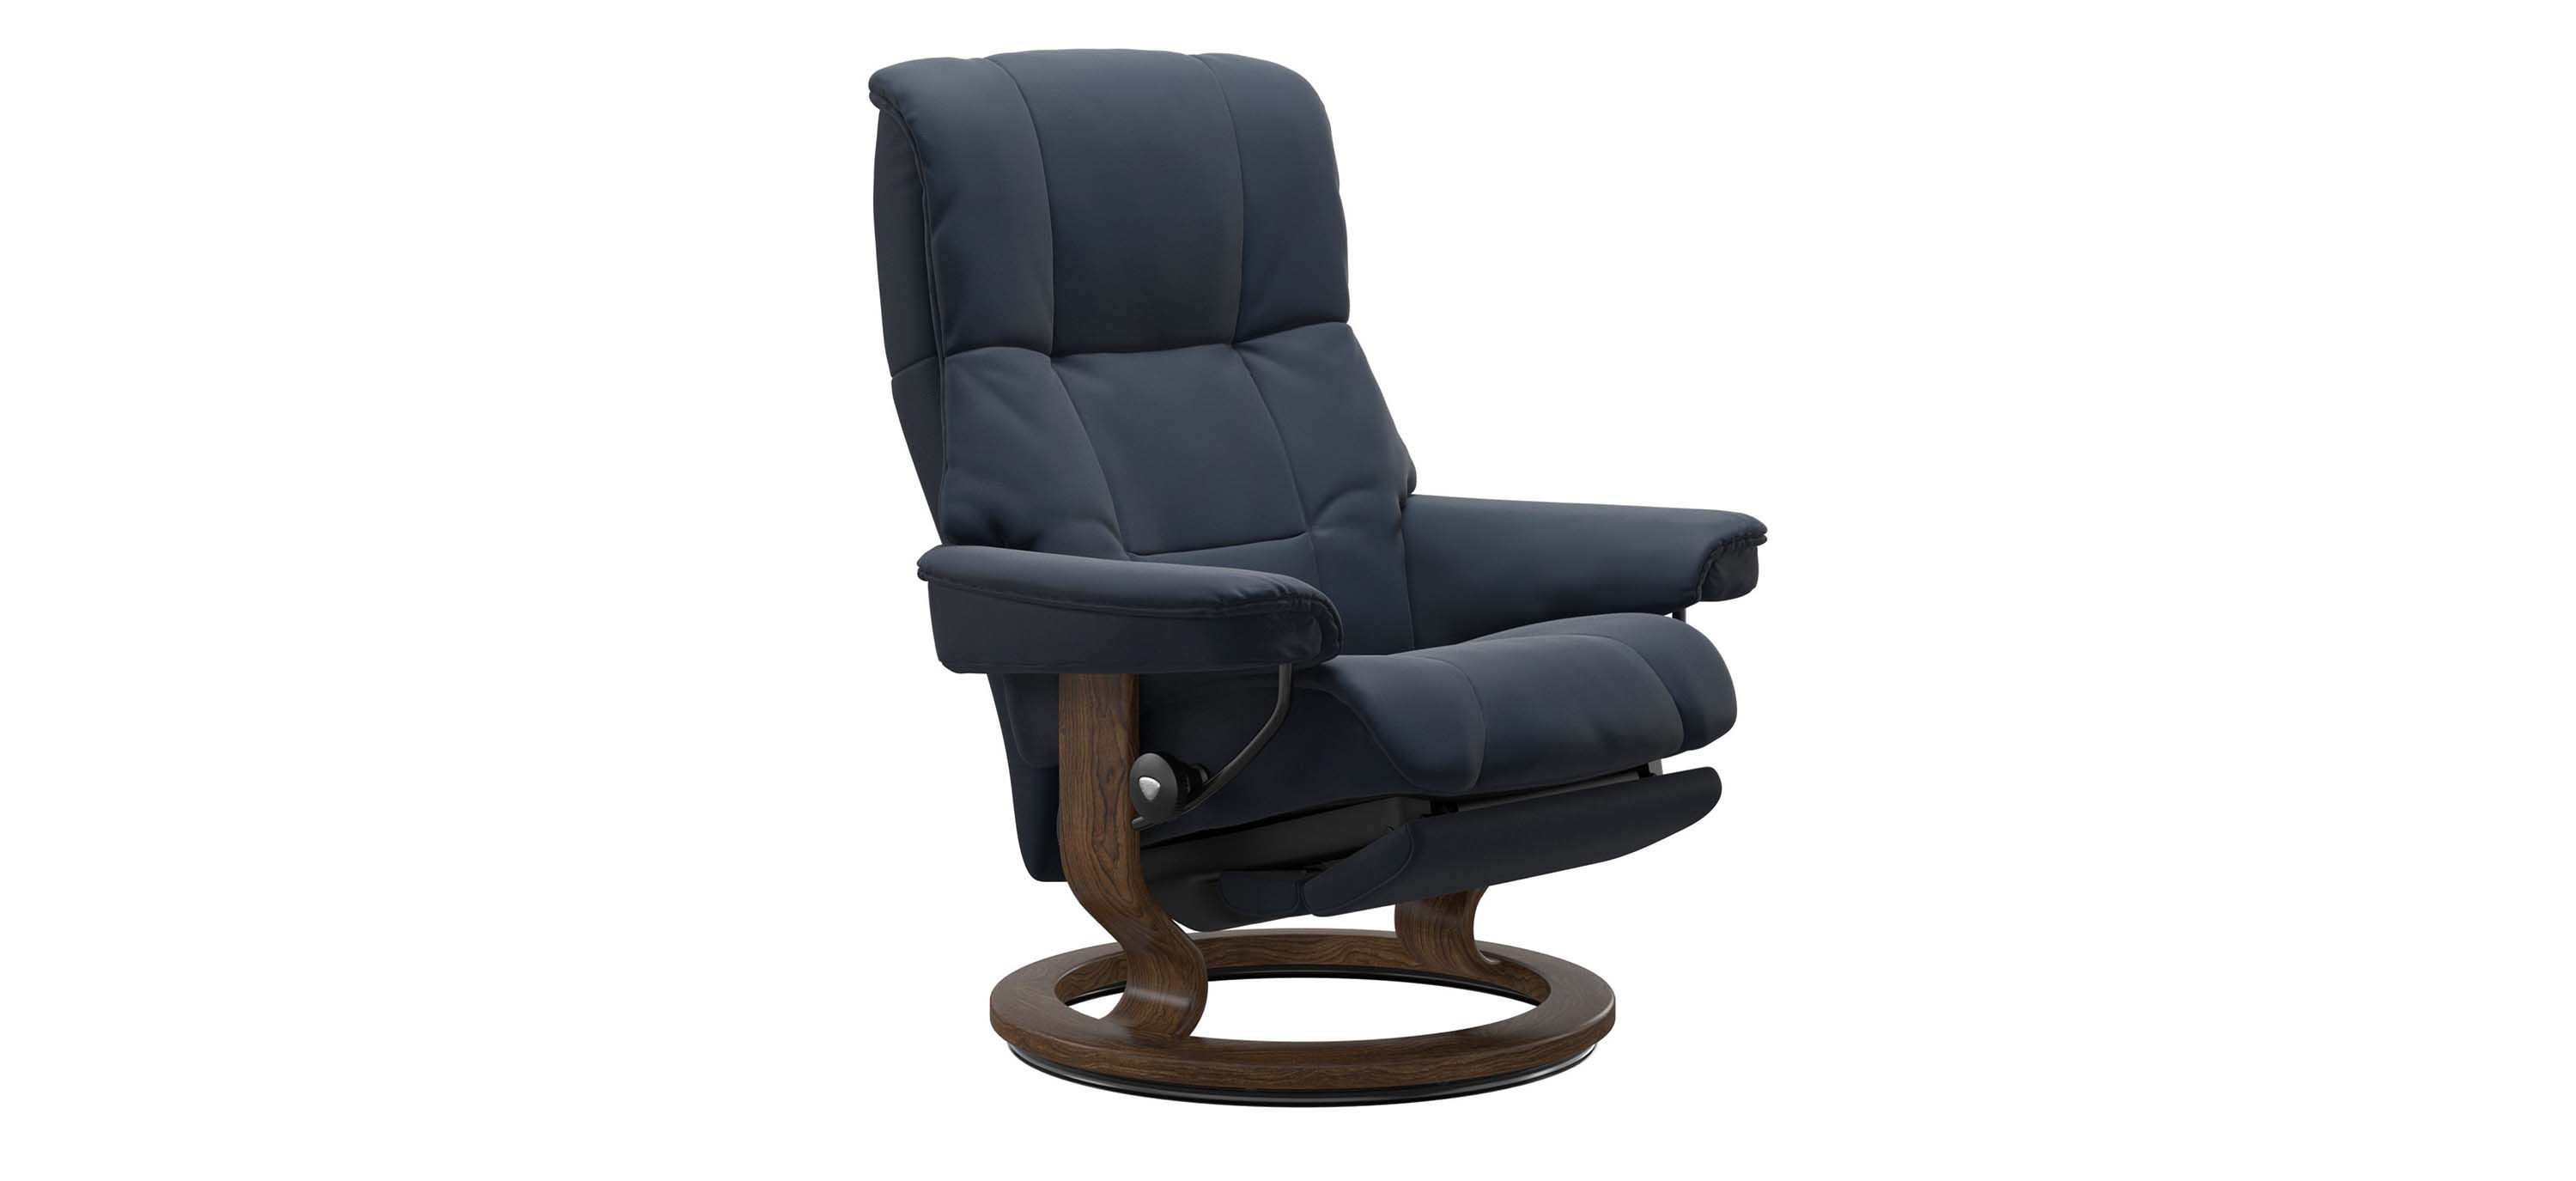 Stressless Mayfair Large Leather Power Reclining Chair and Ottoman